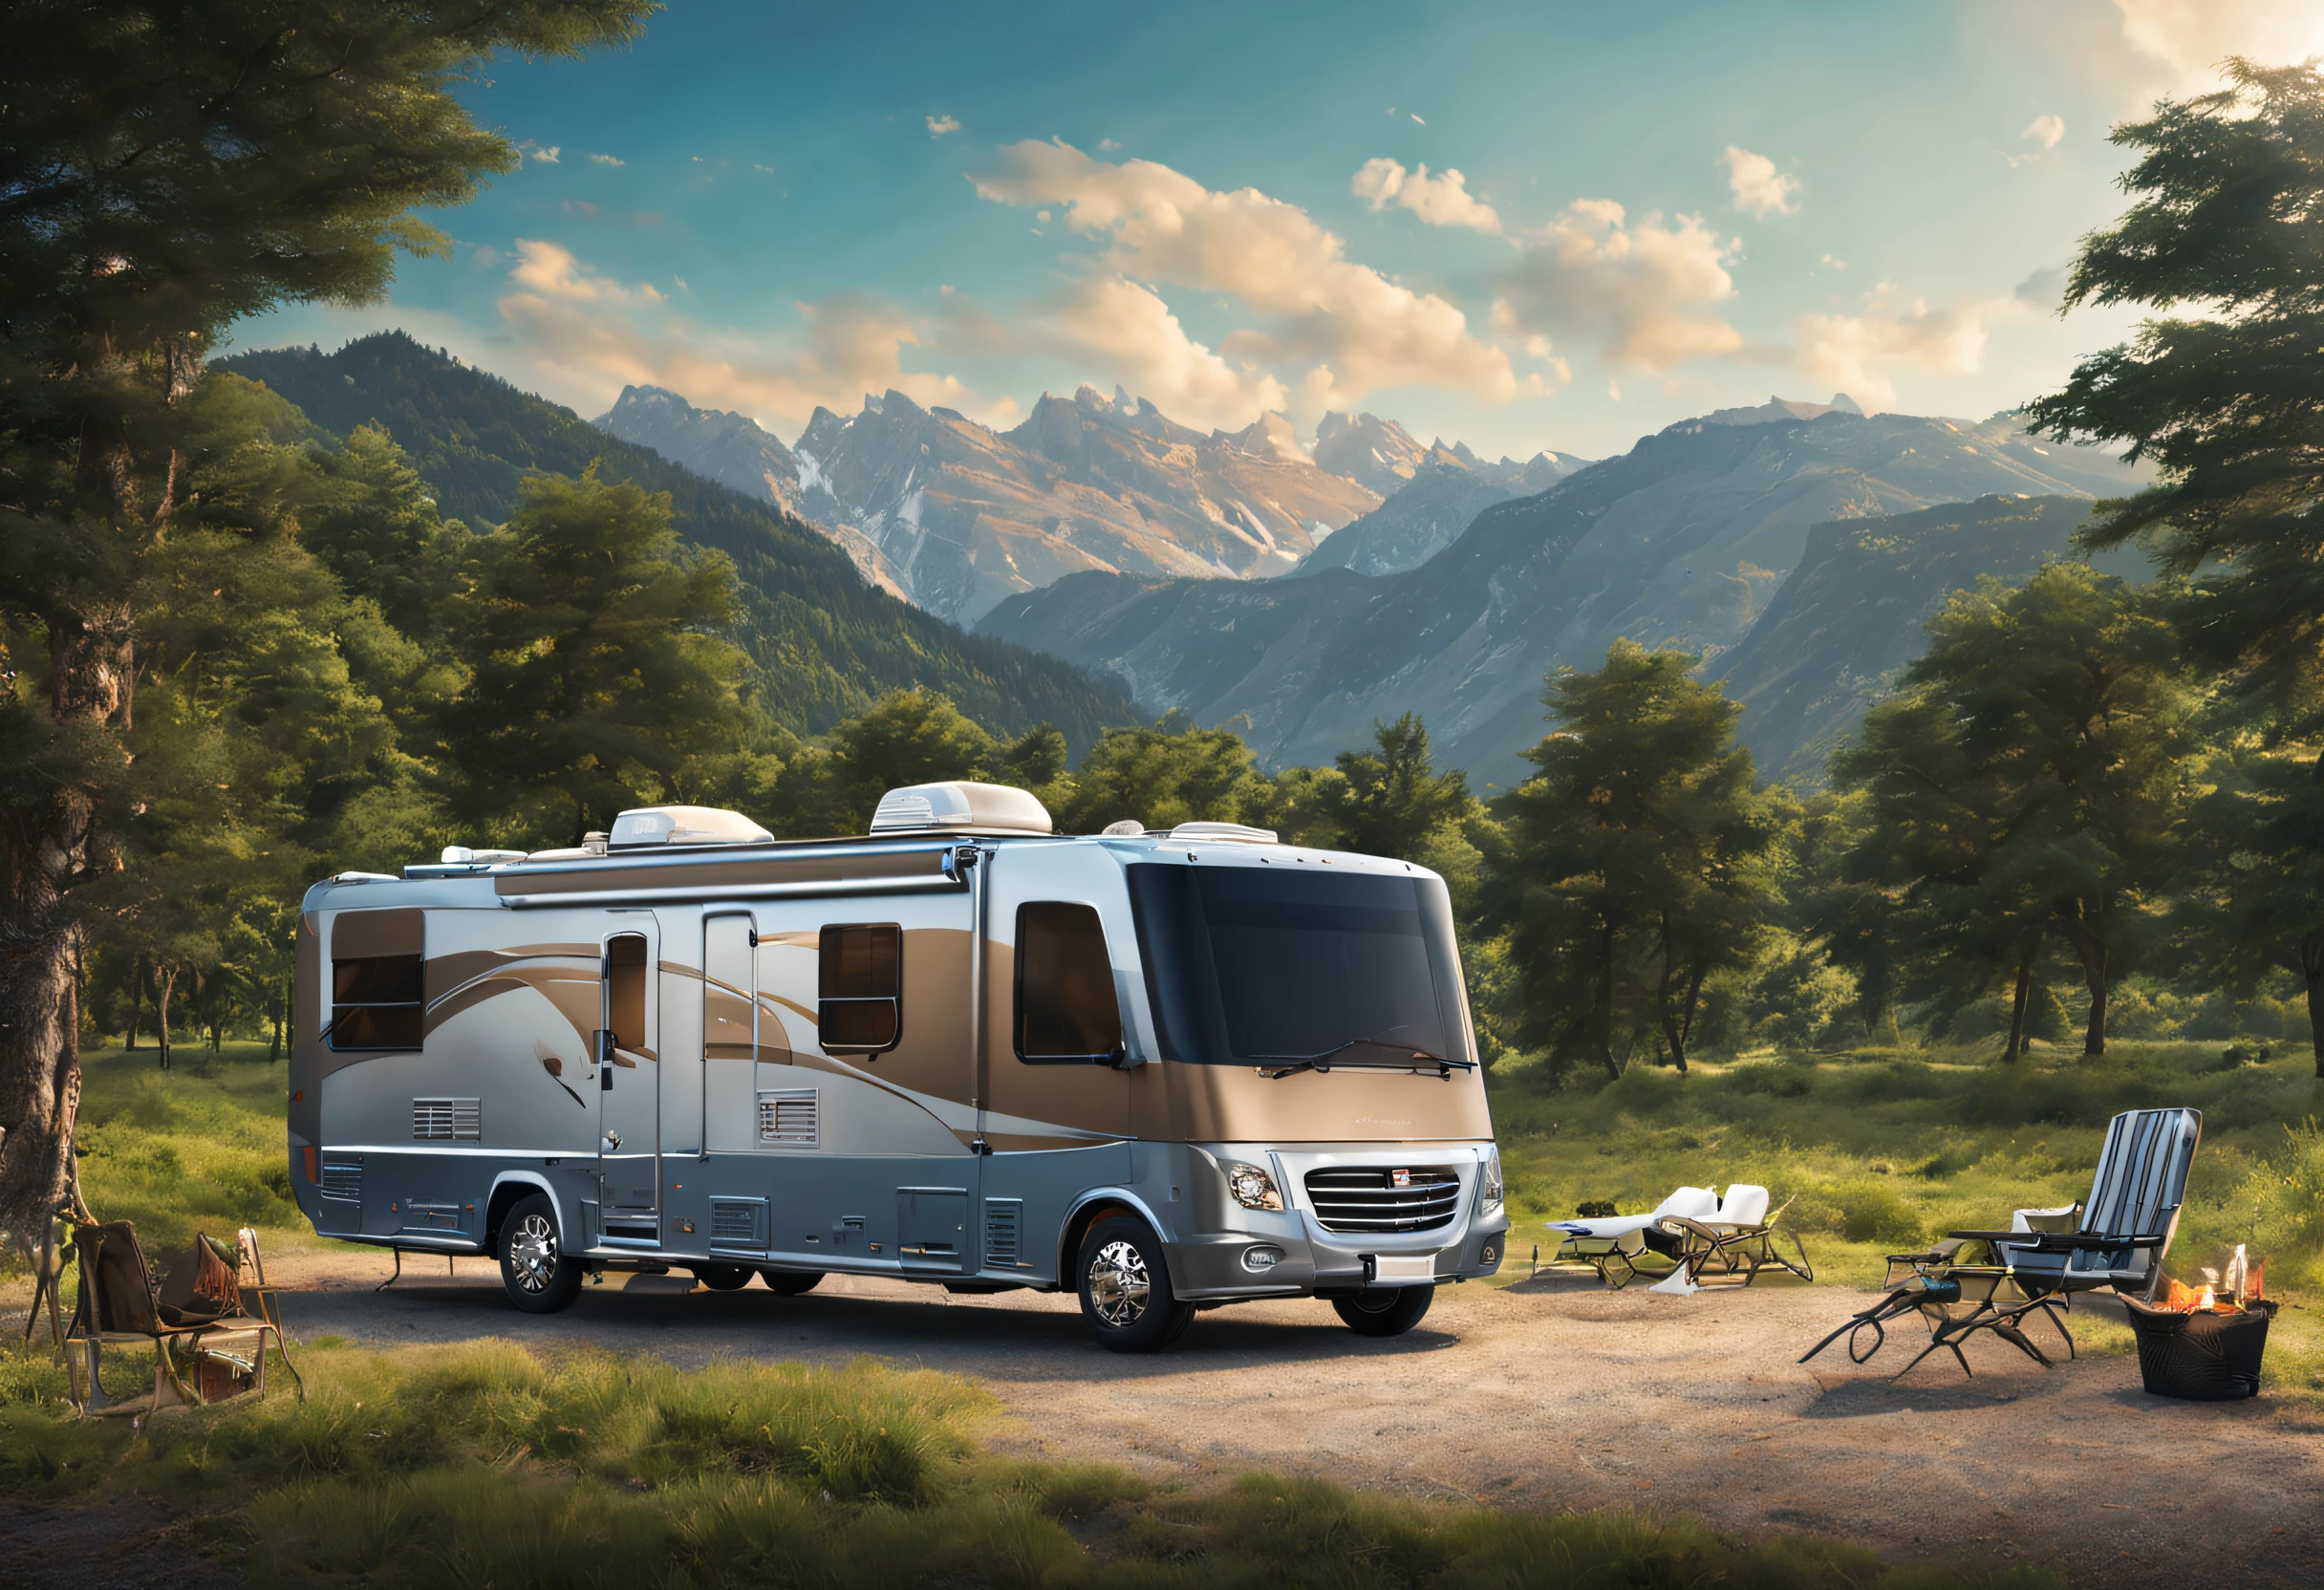 high resolution, masterpiece: 1.2, realistic, ultra-detailed, artistic, 4k, photorealistic, professional, sharp focus, physically based rendering, beautifully composed

Motorhome, luxurious, modern, spacious and comfortable, exterior with elegant design, satellite dish on the roof, large windows, chrome details, wide tires, shiny metallic paint, epic landscape in the background, open road leading to the mountains, the adventure awaits you, family trip, great getaway, quiet camping, roadside jungle, tropical trees, blue sky, lush green grass, barbecue , cover installed outside the RV, chairs and table scattered everywhere ,smoke coming out of the grill, a family gathering, laughing and enjoying the moment,